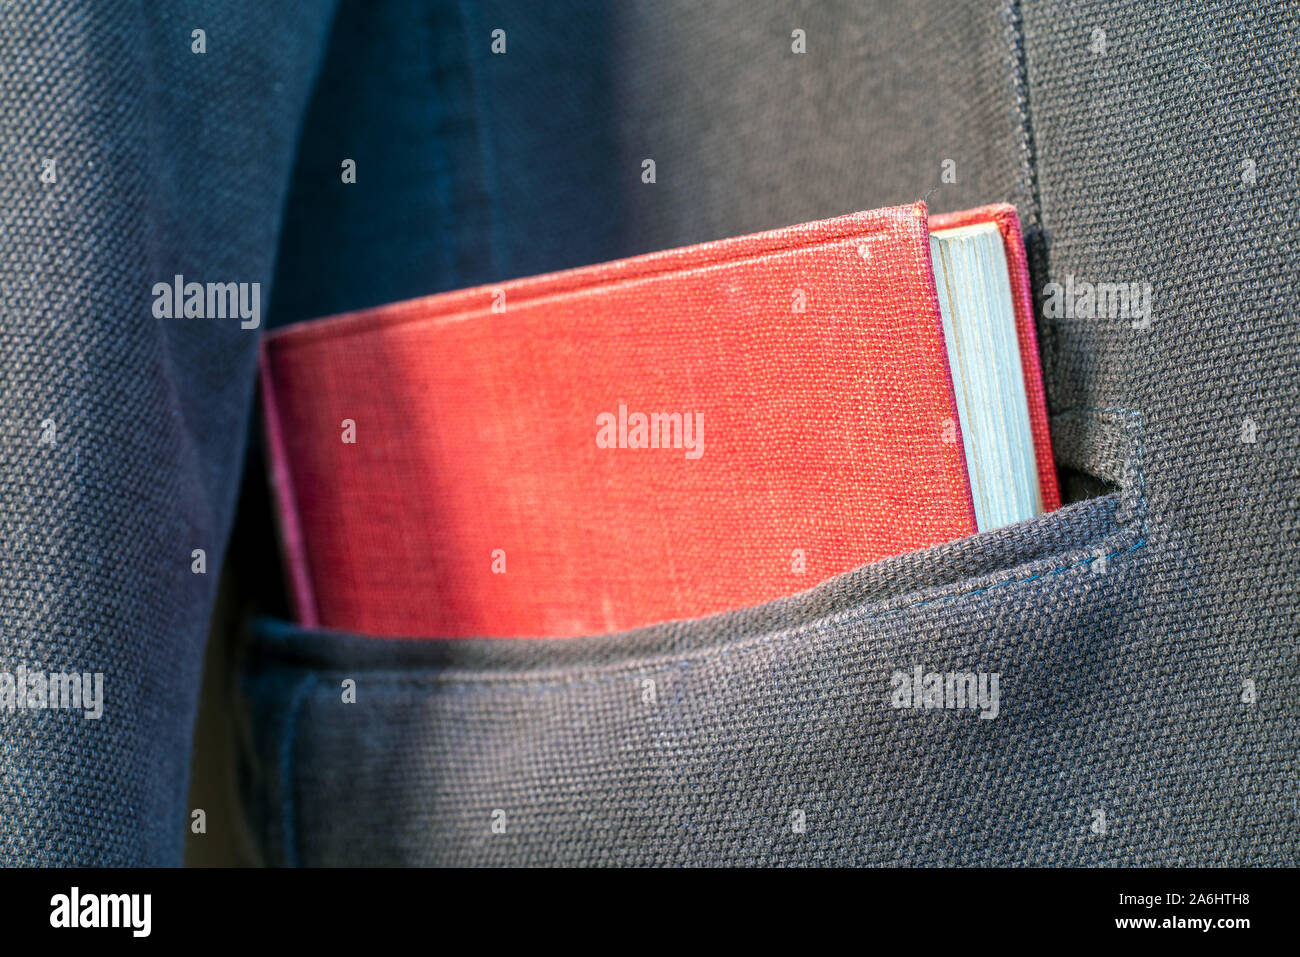 red book in a jacket pocket Stock Photo